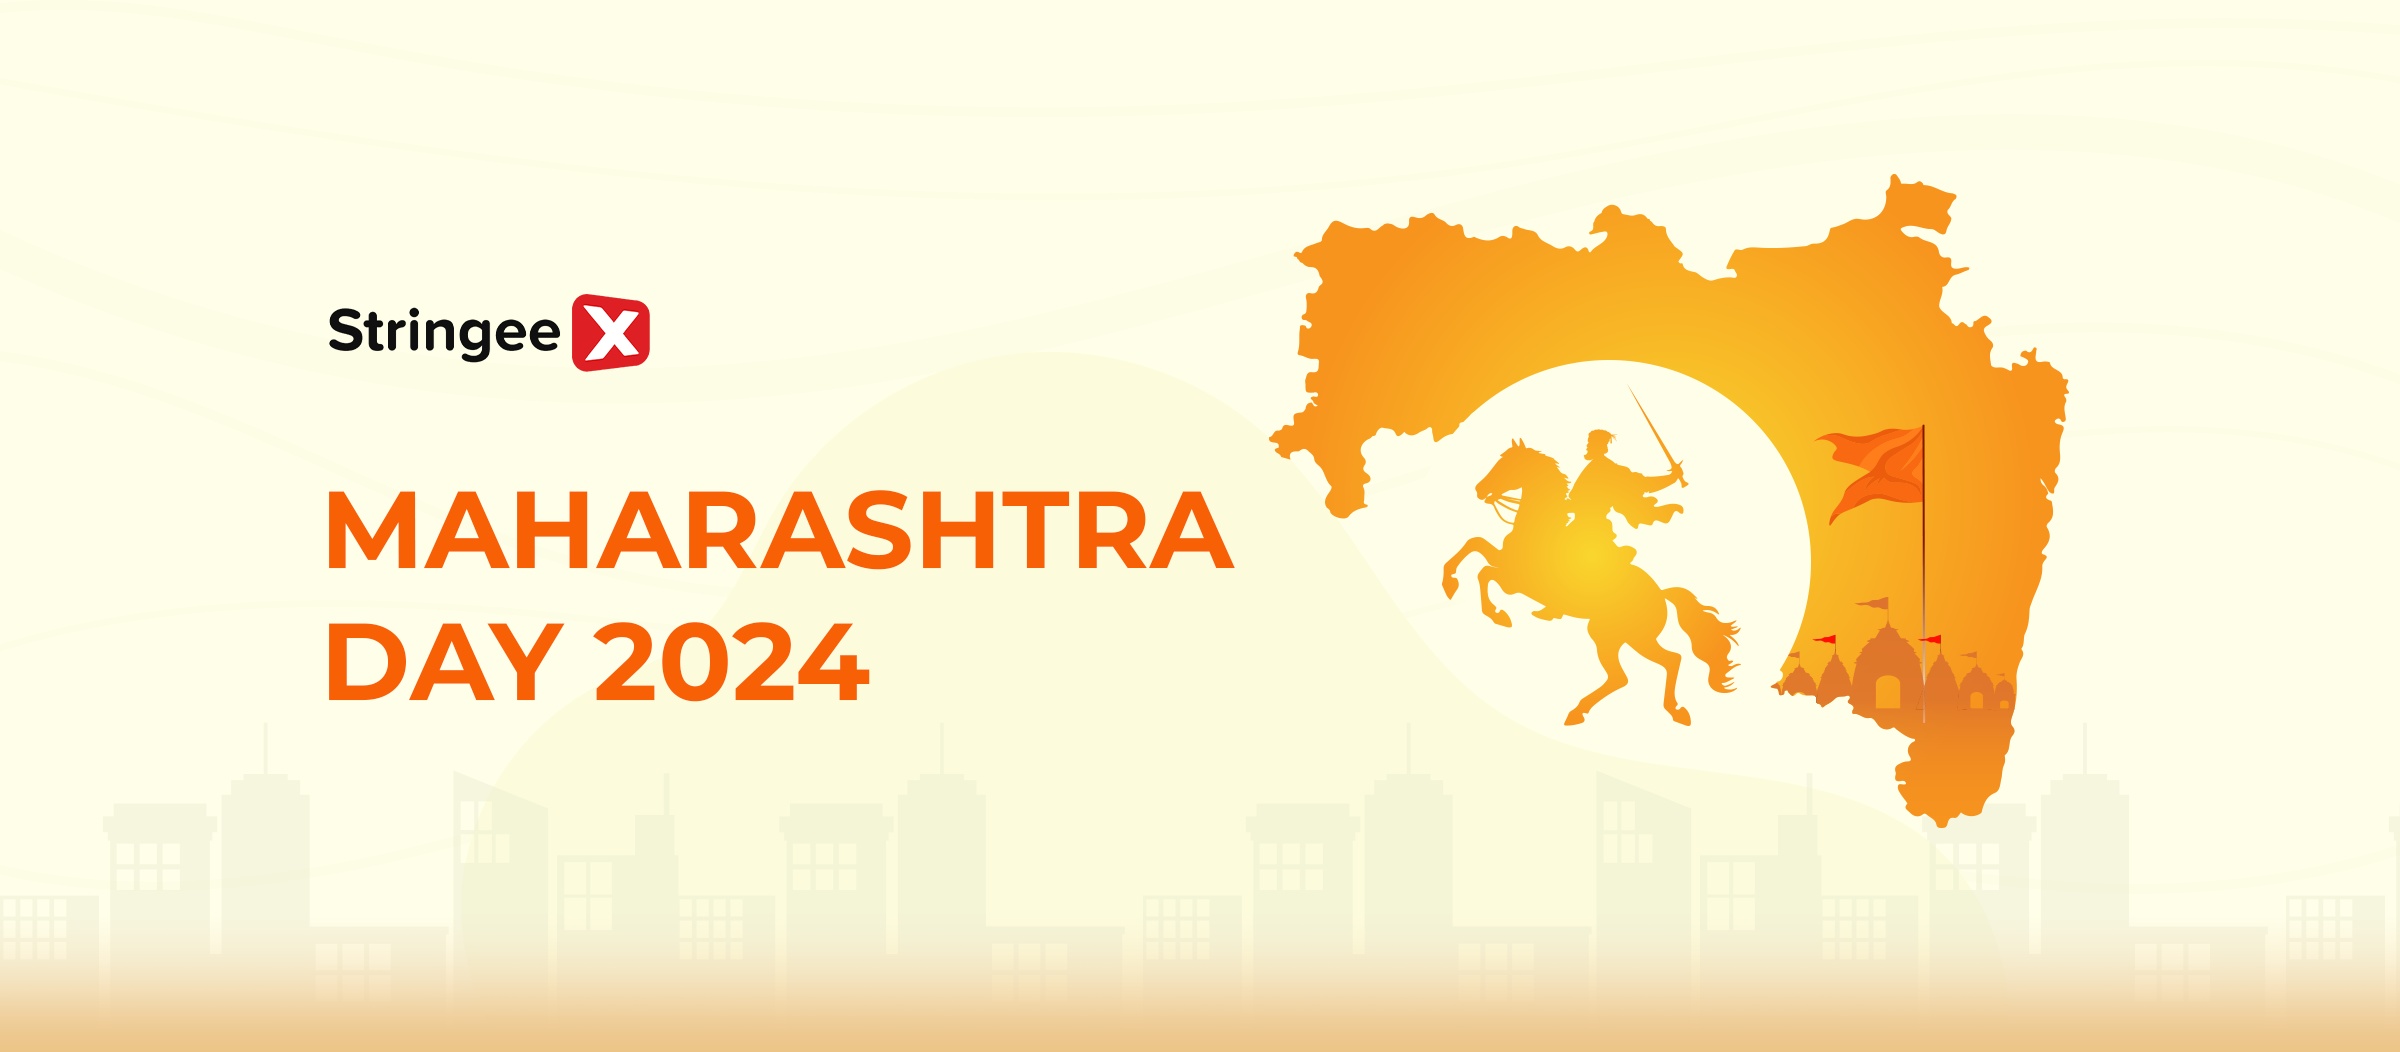 Maharashtra Day 2024: When It Happens And How To Celebrate?